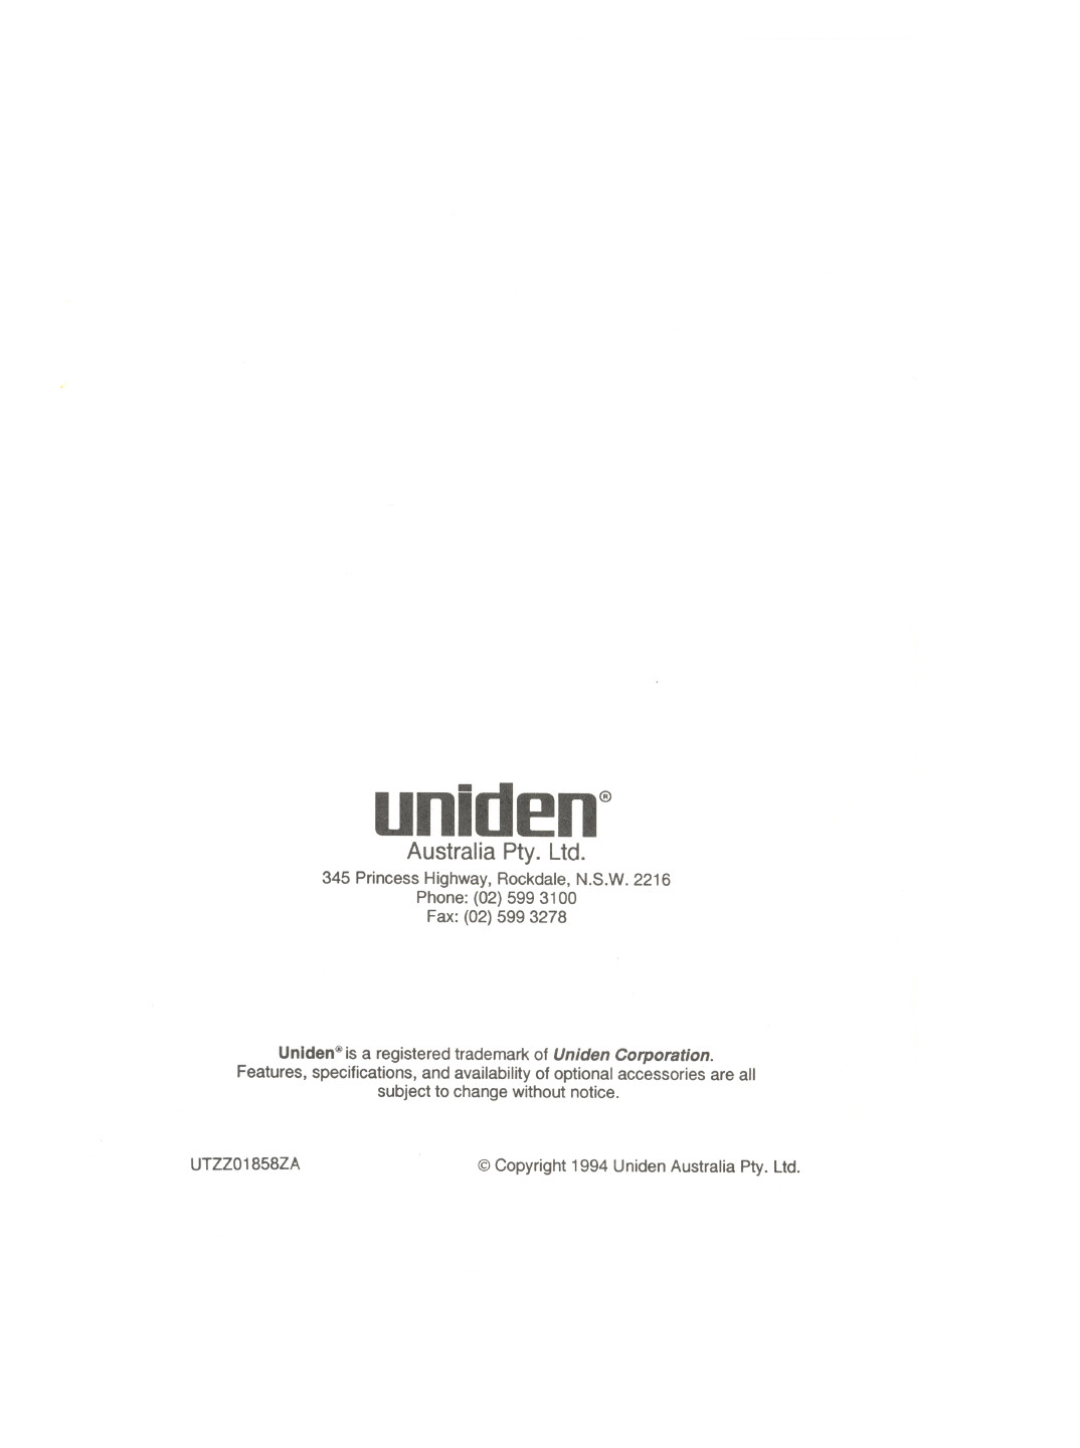 Uniden UH-099 uniden@, Princess Highway, Rockdale, N.S.W Phone 02 599 Fax 02 599, subject to change without notice 